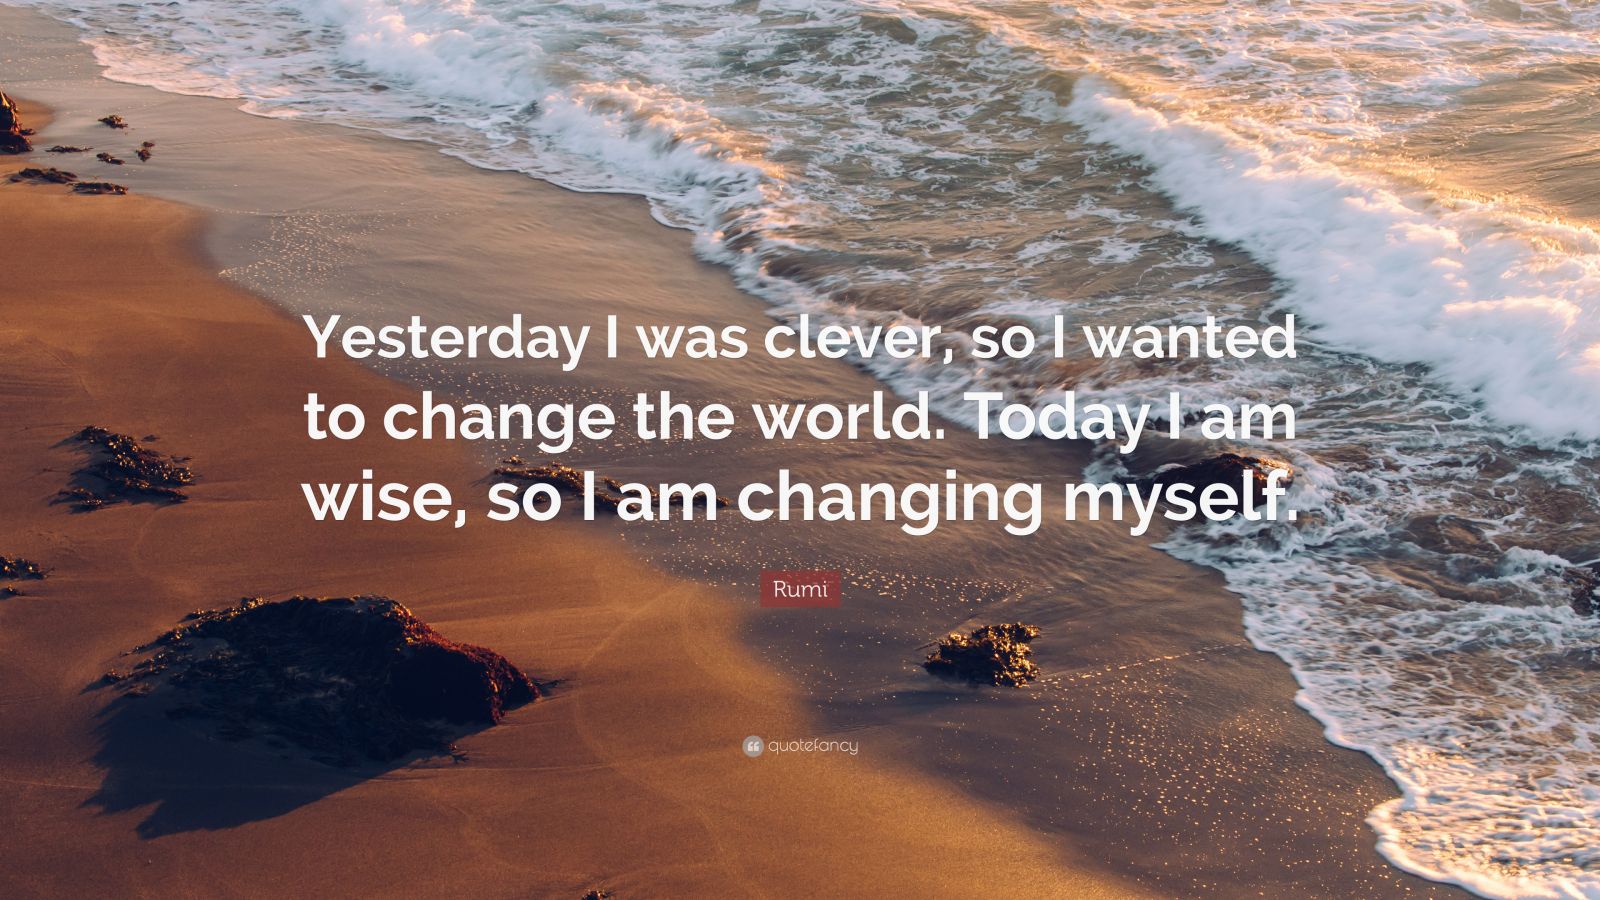 Rumi Quote: “Yesterday I was clever, so I wanted to change the world